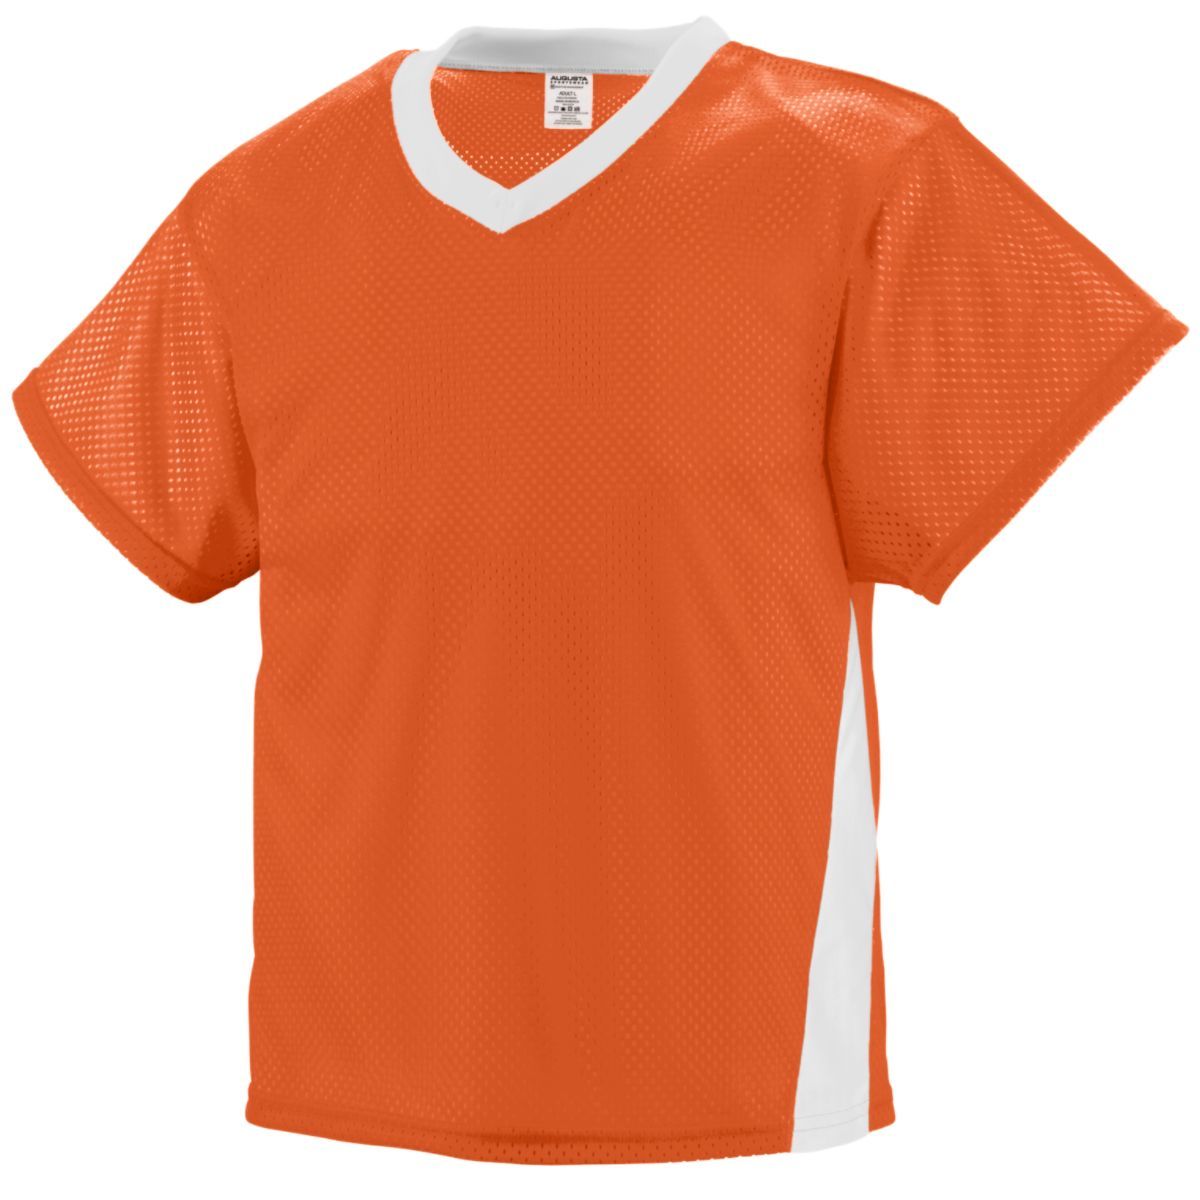 Augusta Sportswear High Score Jersey in Orange/White  -Part of the Adult, Adult-Jersey, Augusta-Products, Lacrosse, Shirts, All-Sports, All-Sports-1 product lines at KanaleyCreations.com